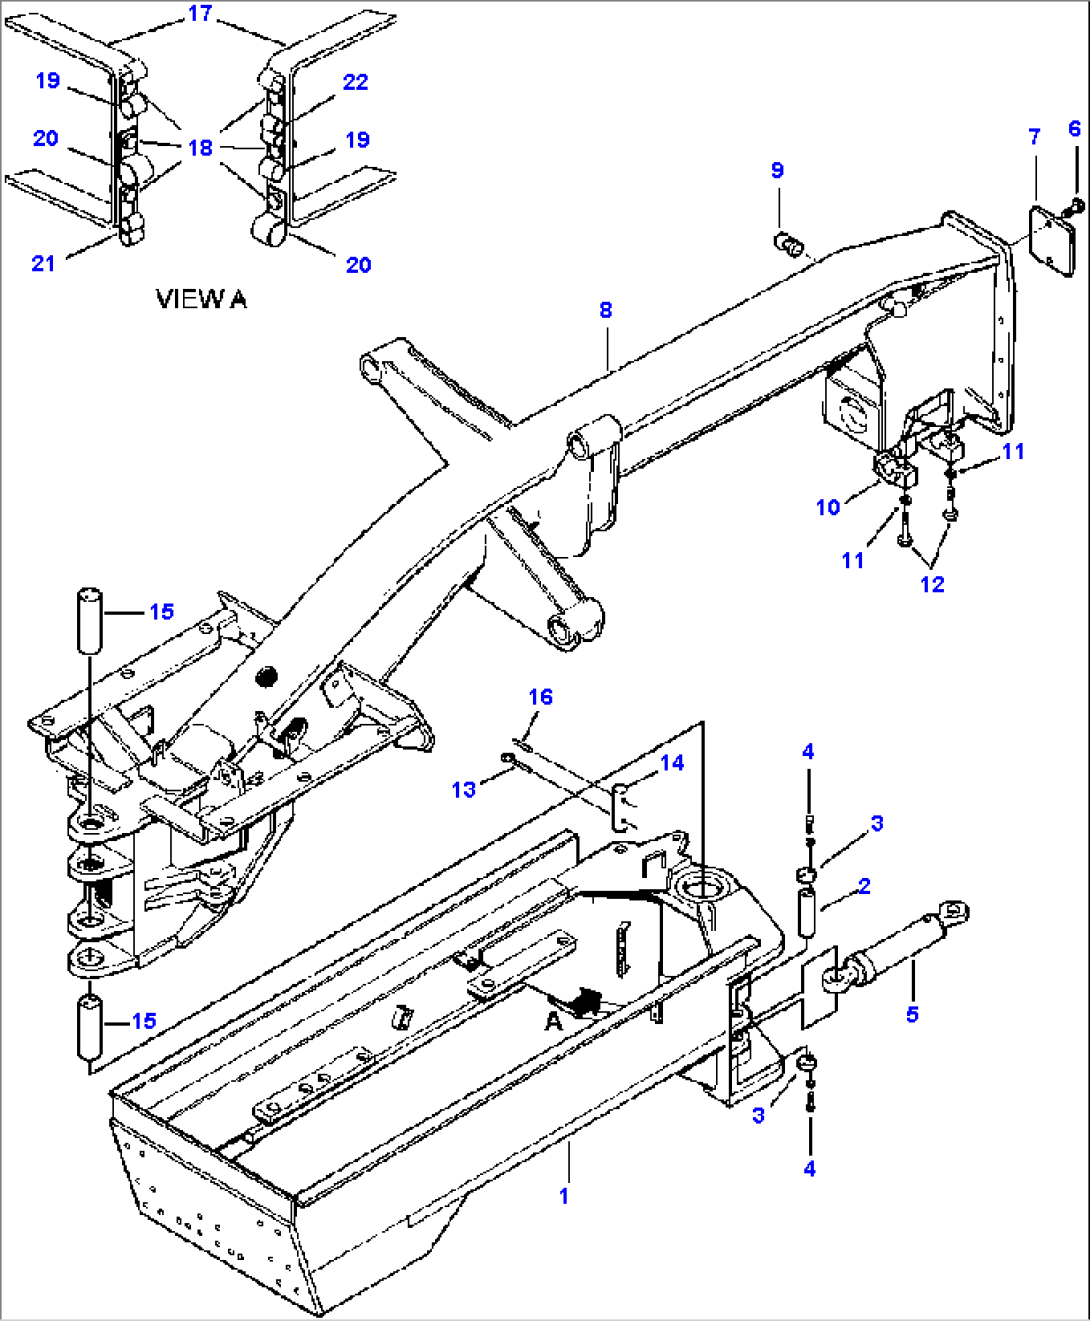 MAIN FRAME 830 B - R.H. BIASED BLADE SUSPENSION - S/N 203959 AND UP